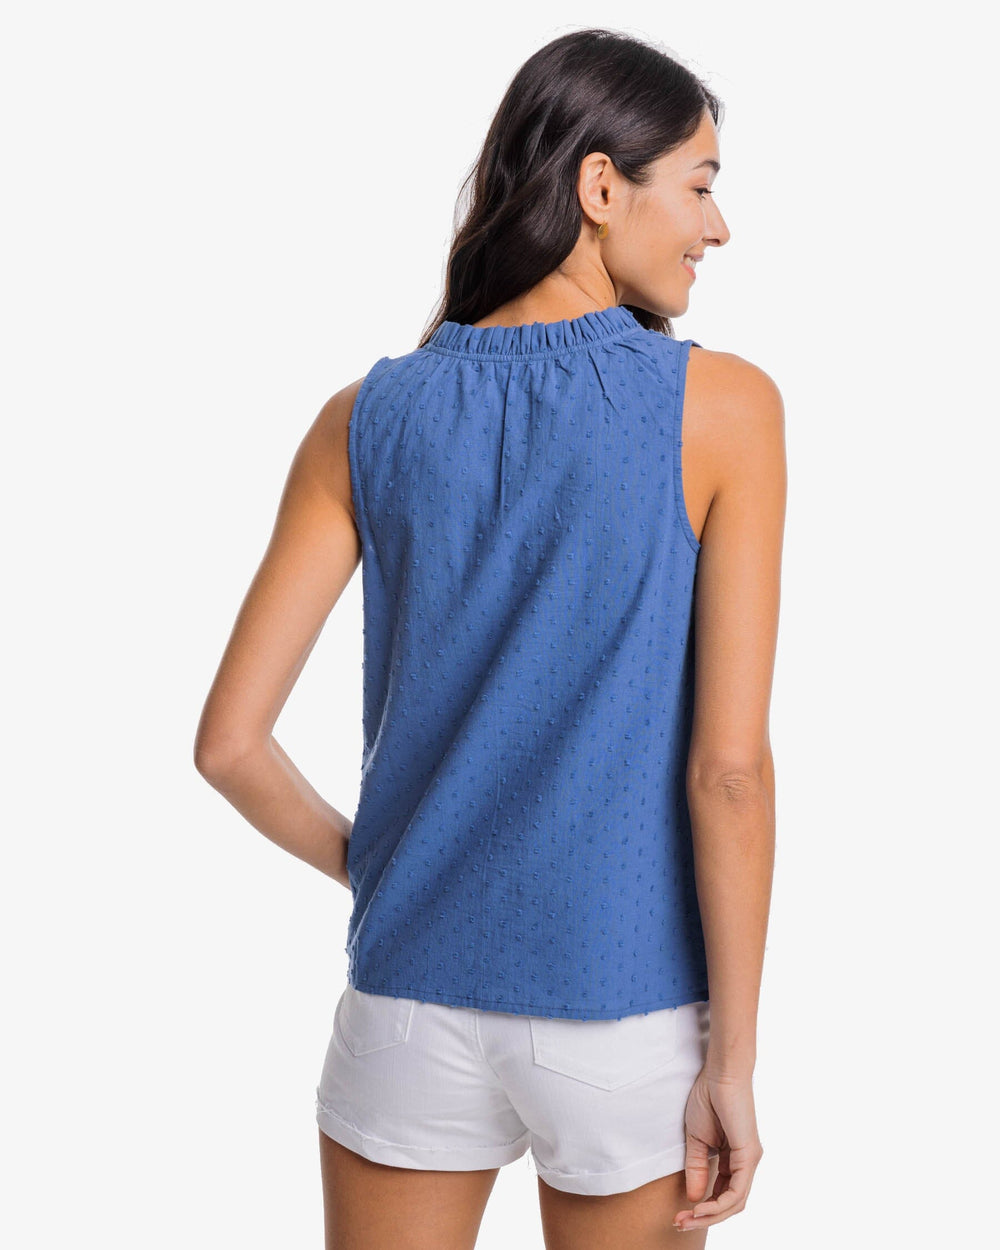 The back view of the Southern Tide Mary Catherine Swiss Dot Top by Southern Tide - Seven Seas Blue